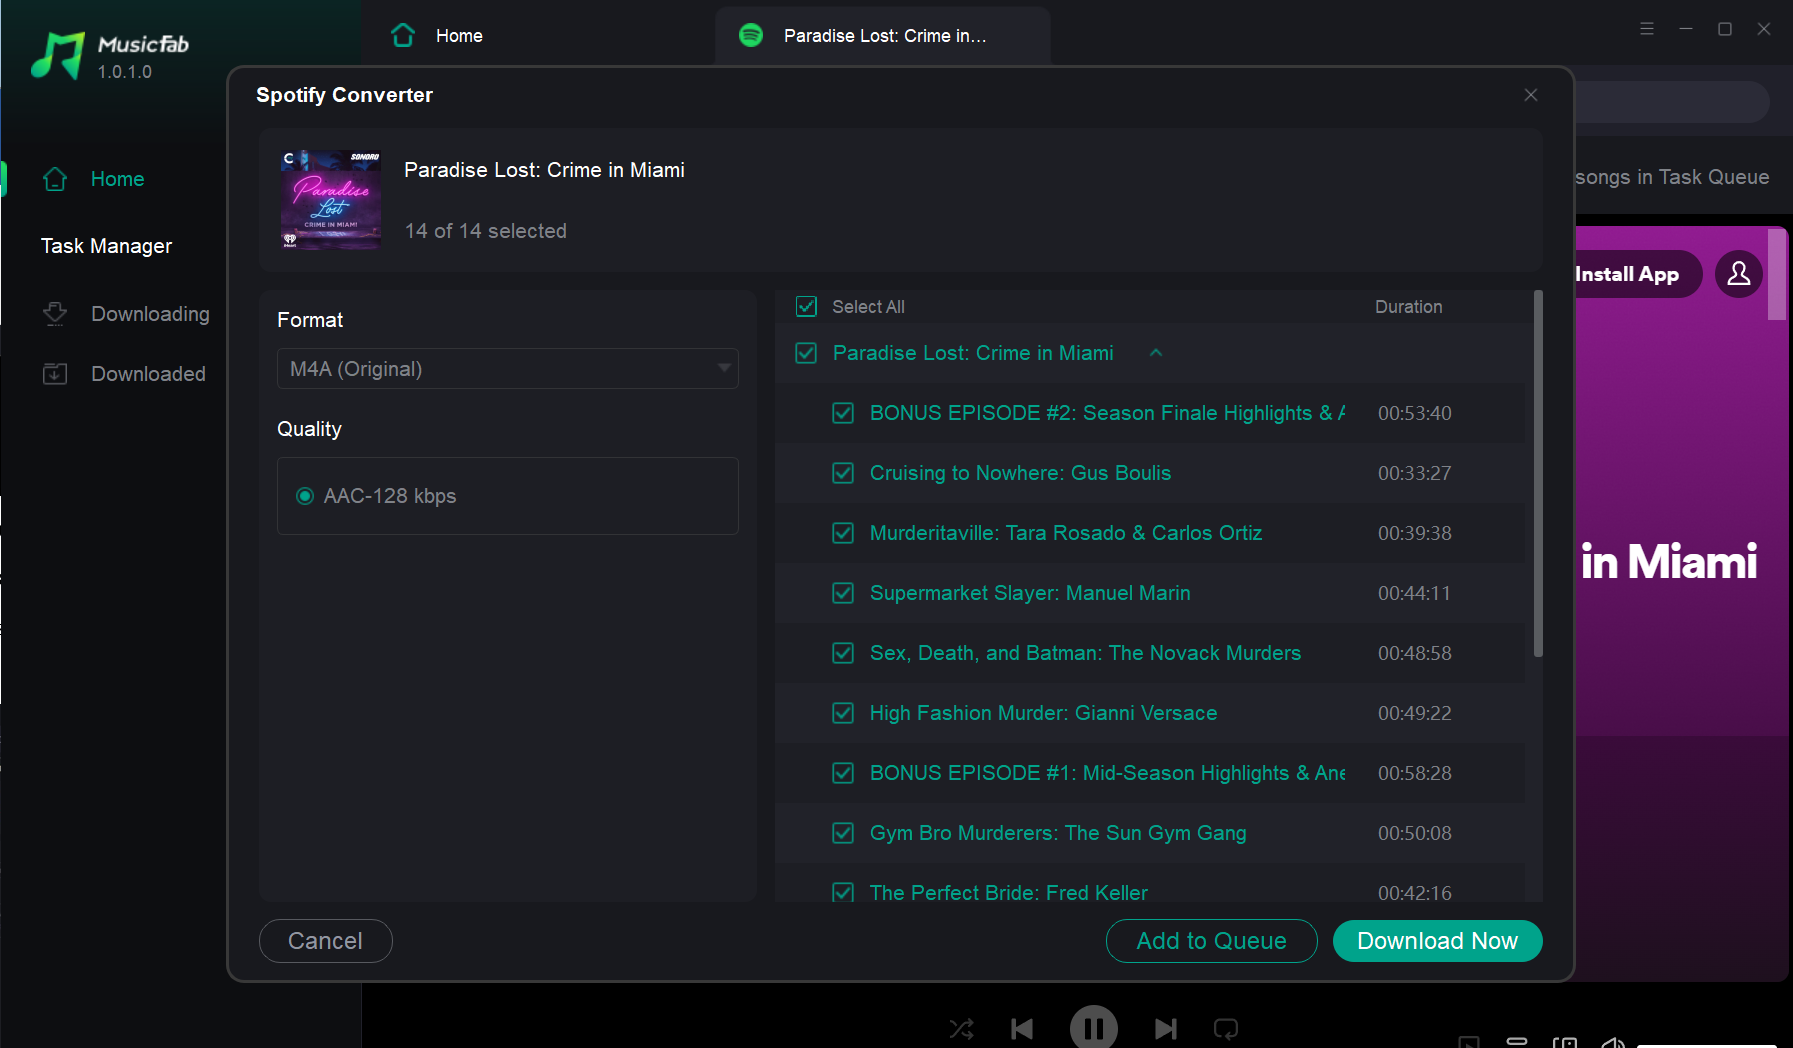 It then lets you download all the songs with the click of a button.